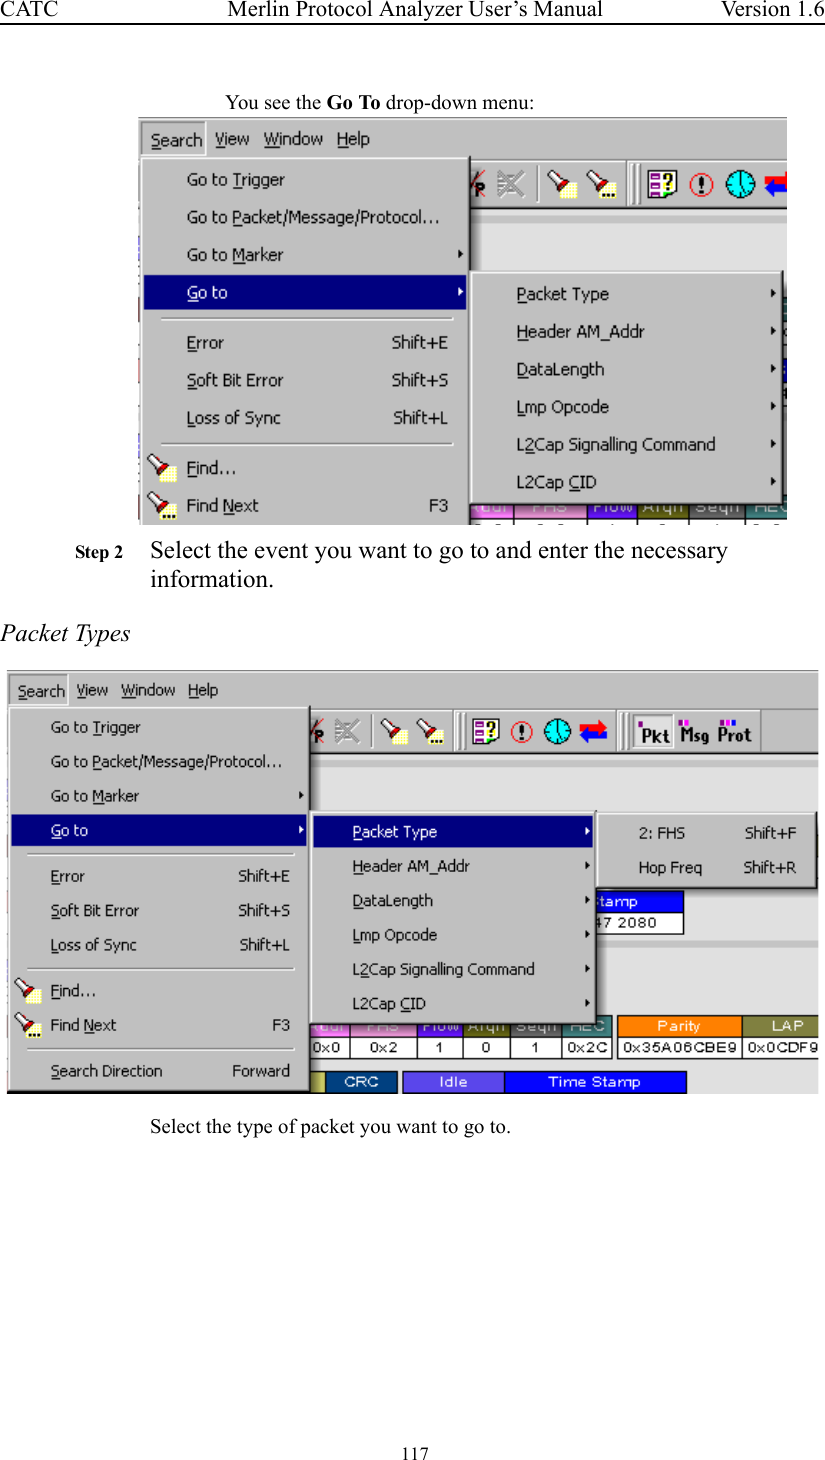  117 Merlin Protocol Analyzer User’s ManualCATC Version 1.6You see the Go To drop-down menu:Step 2 Select the event you want to go to and enter the necessary information.Packet TypesSelect the type of packet you want to go to.